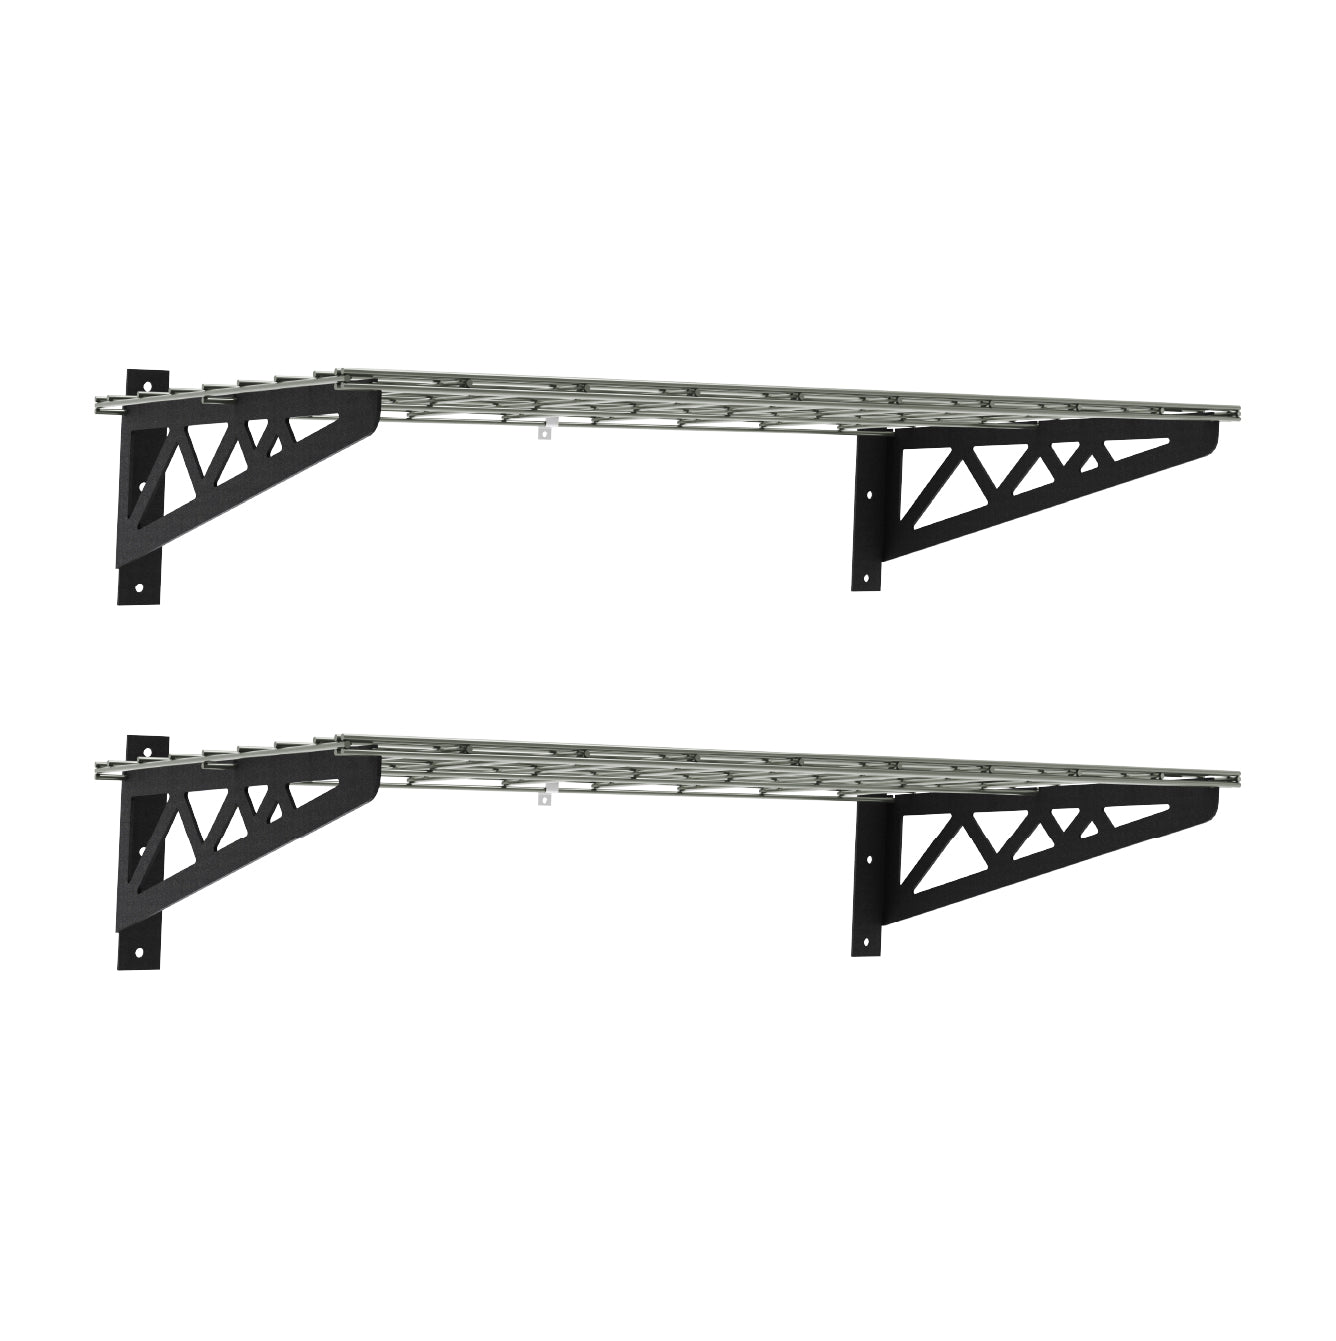 SafeRacks 18 x 48 Wall Shelves, 2 Pack with Accessory Hooks, Hammertone